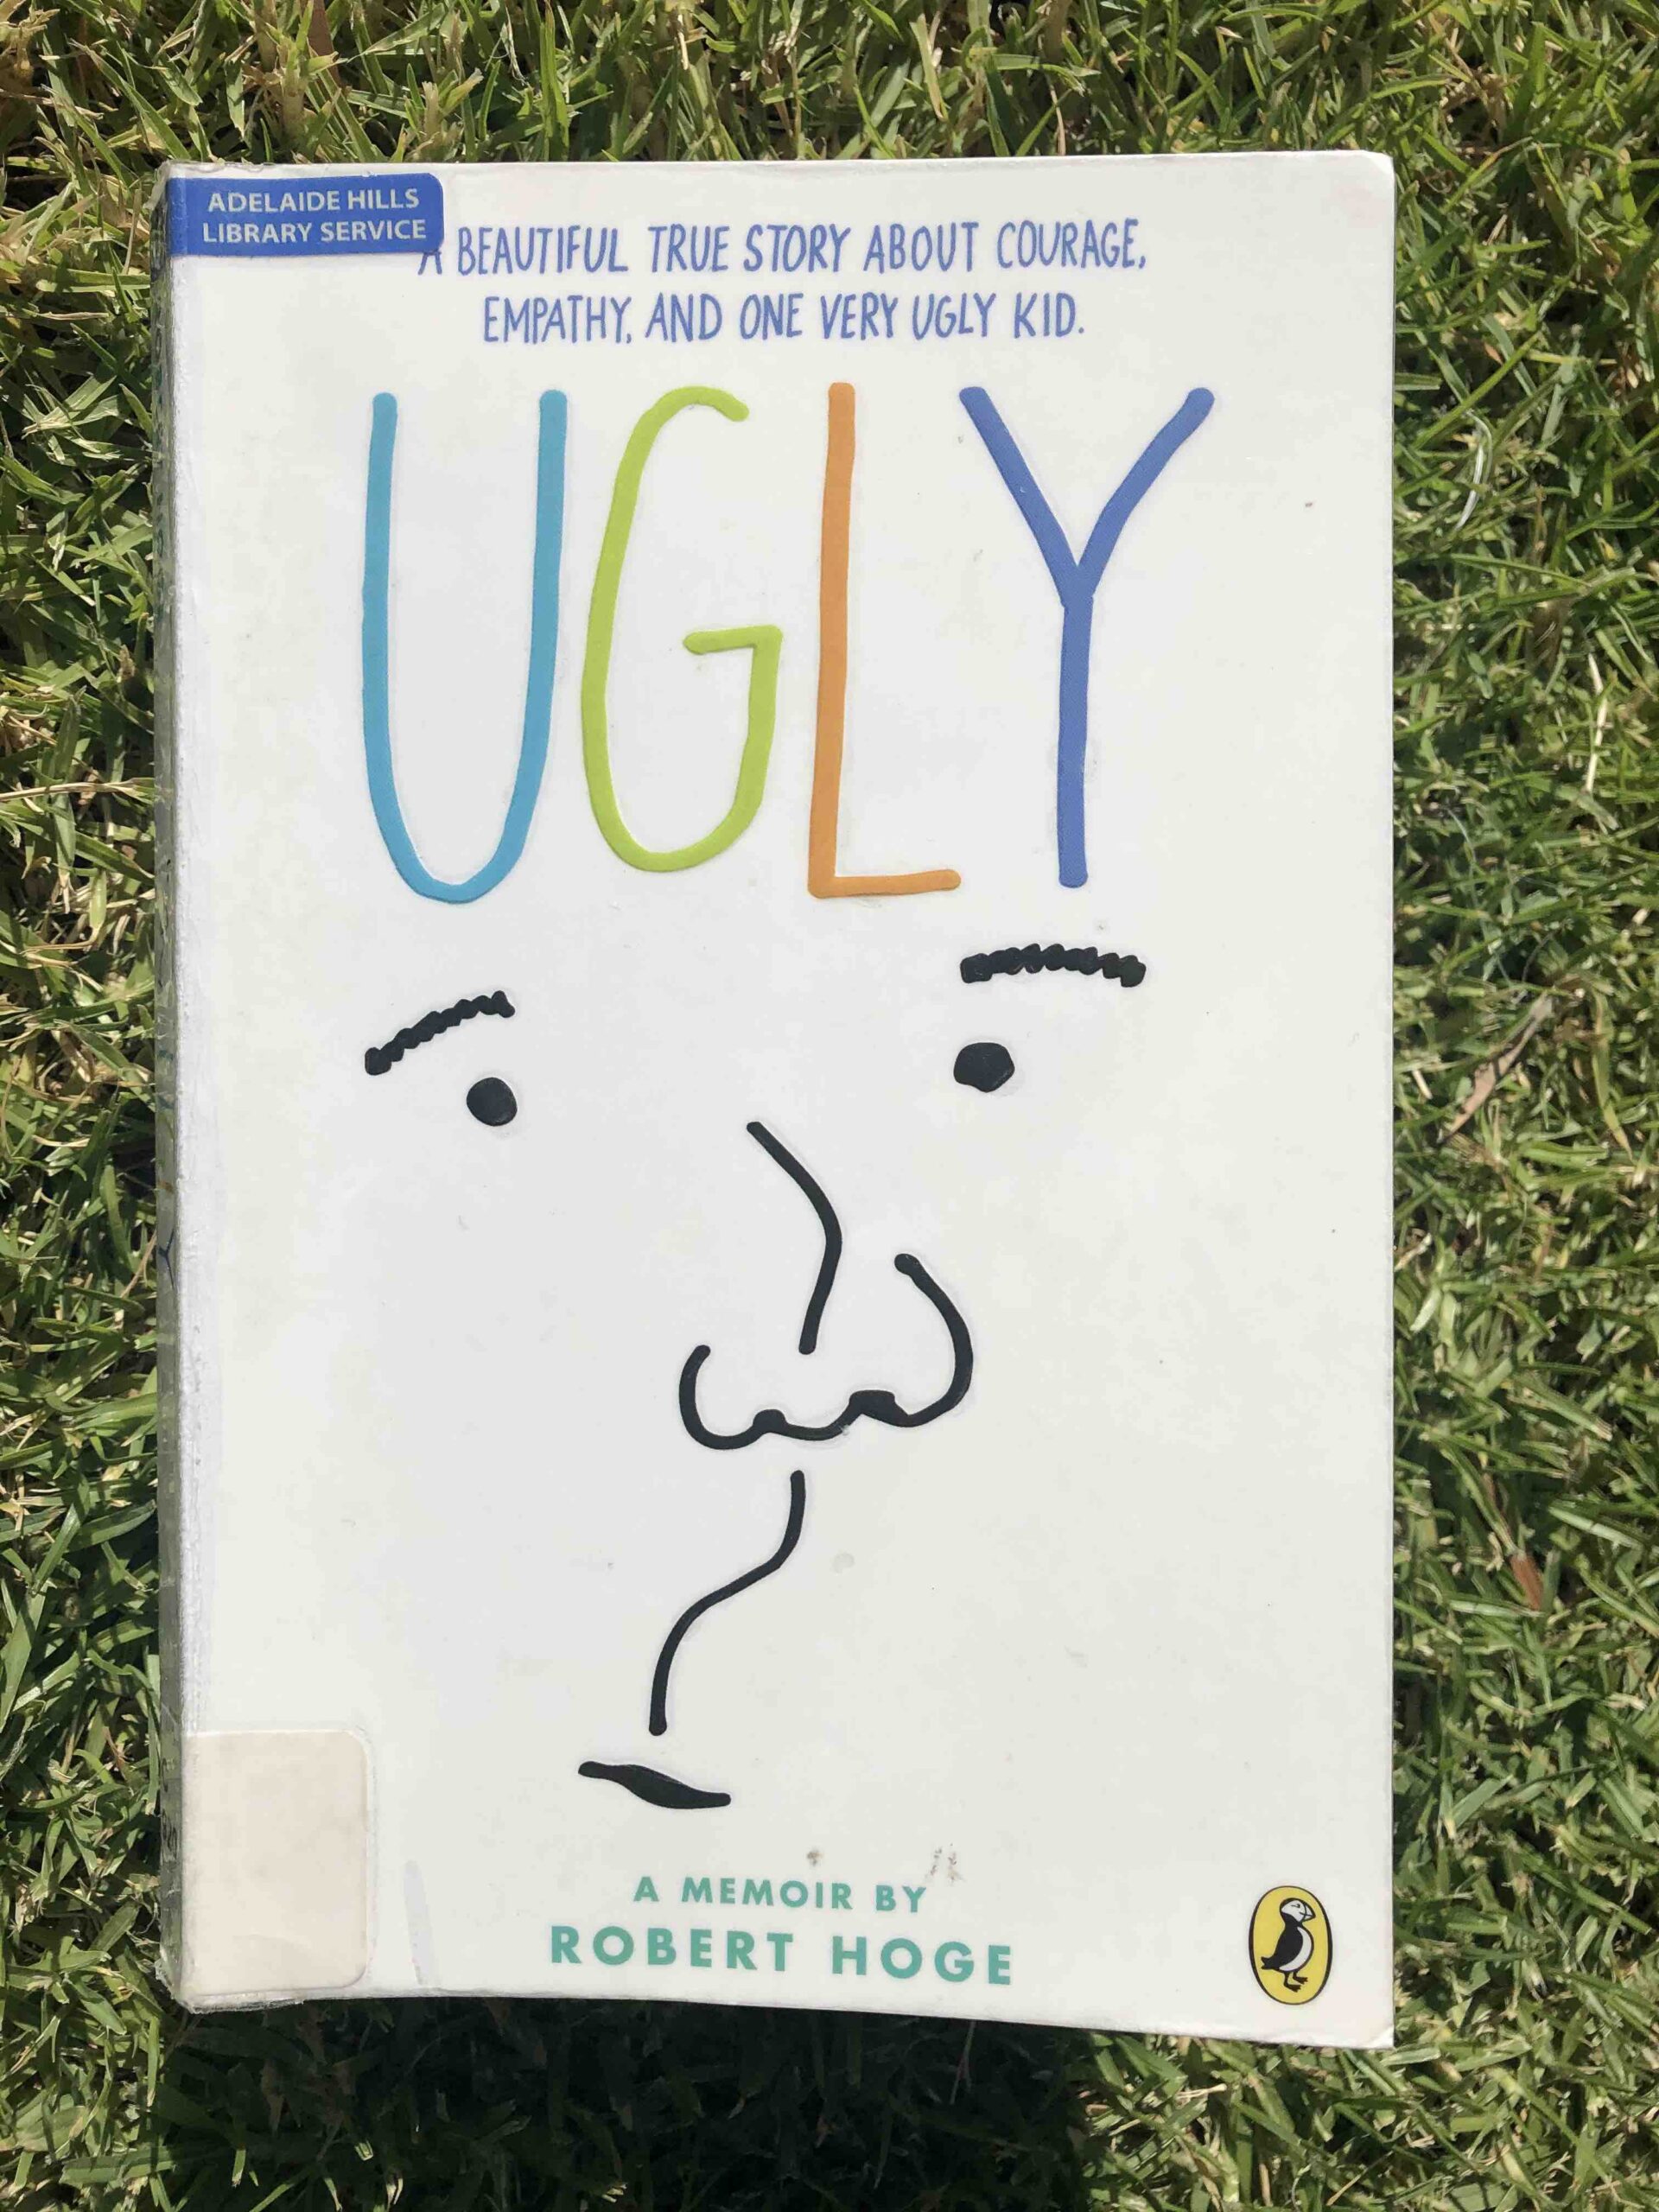 Cover of the book 'Ugly. The word 'Ugly' is in coloured letters at the top and below is a black and white sketch of a face.